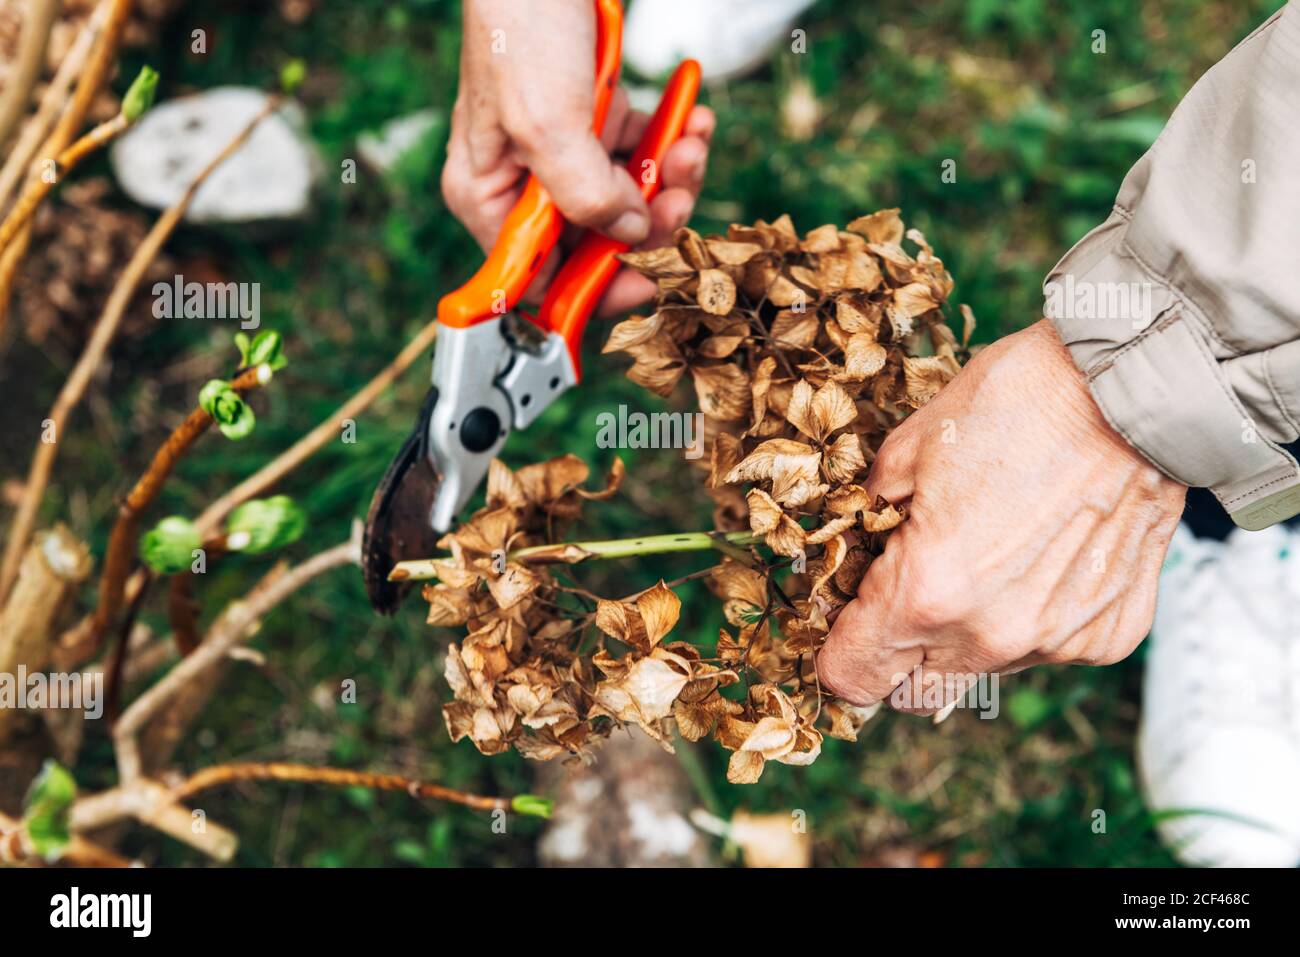 From above crop of unrecognizable Woman trimming dried plants with secateurs in house garden Stock Photo